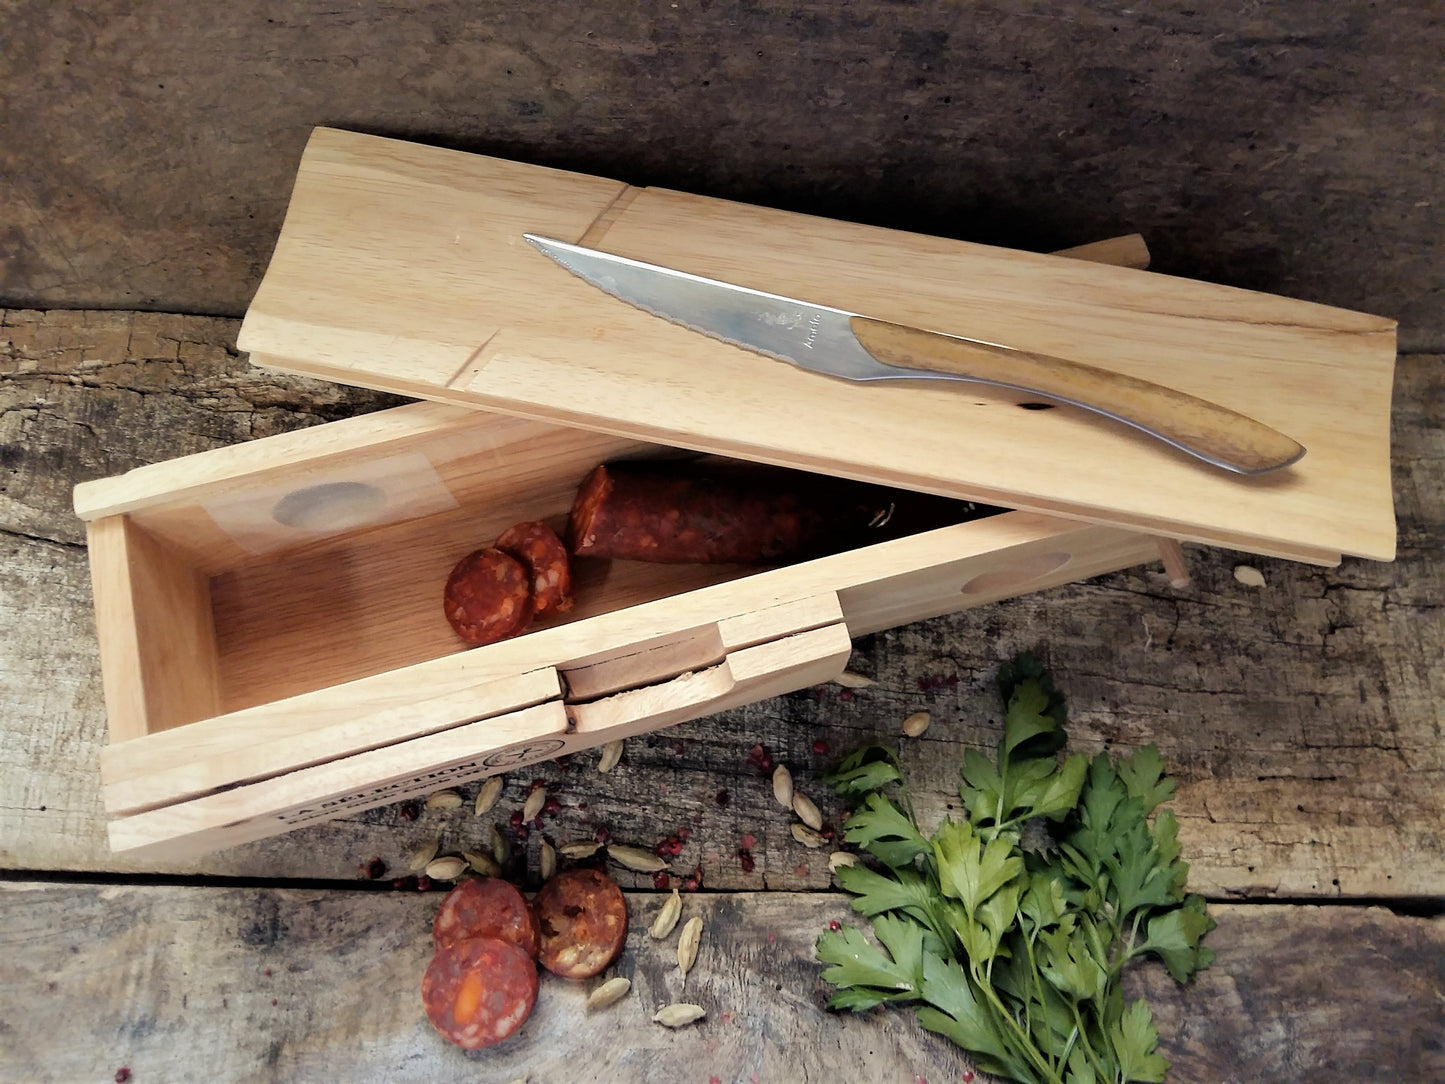 Charcuterie Box. Saucisson Sausage Storage Box with Chopping Board Lid. from Tiggy & Pip - €69.50! Shop now at Tiggy and Pip